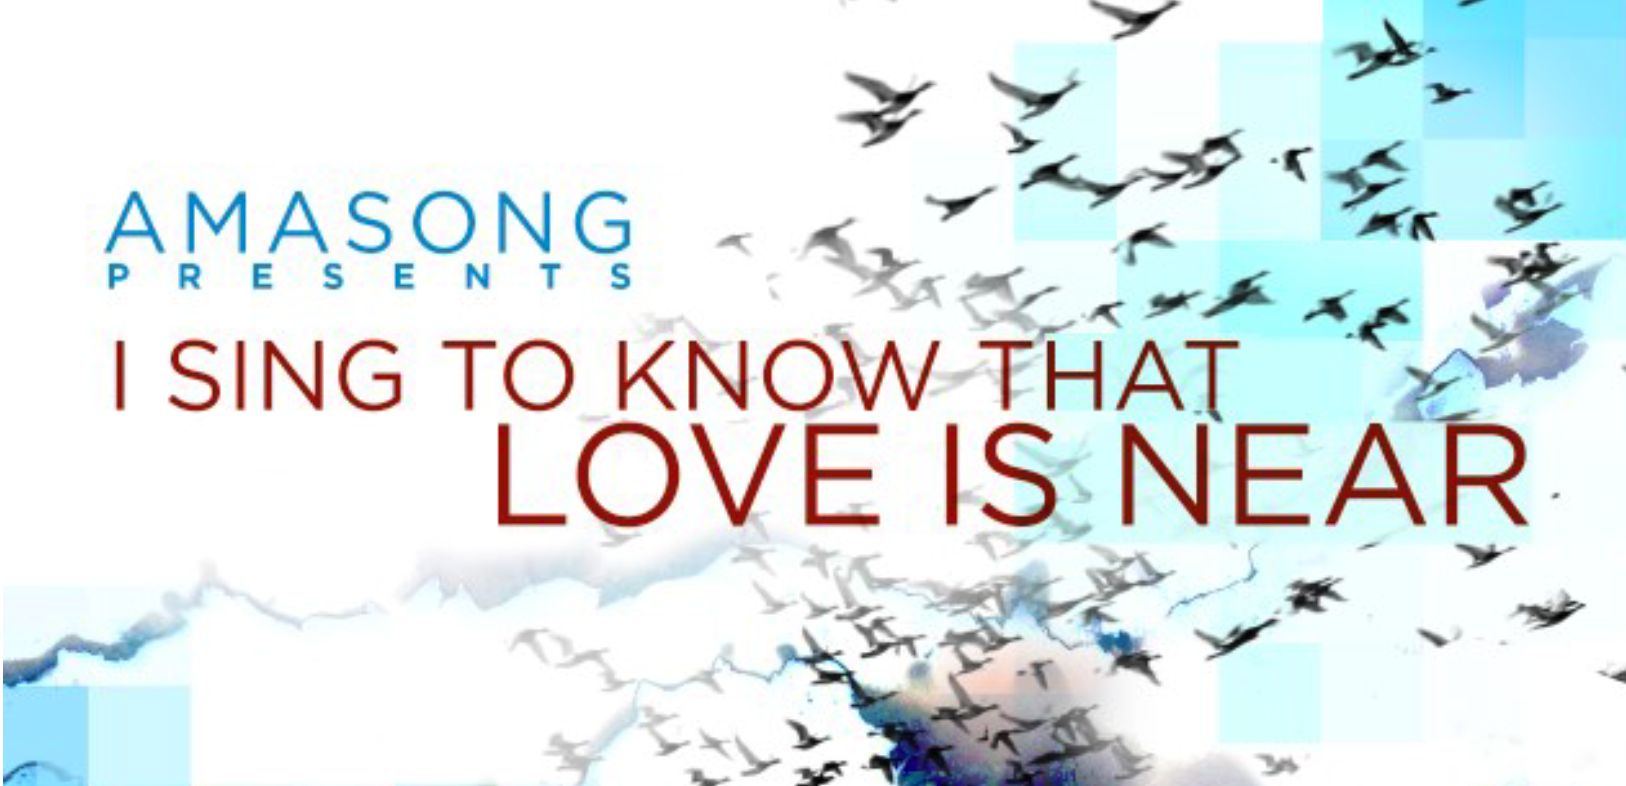 Amasong presents I sing to know that love is near